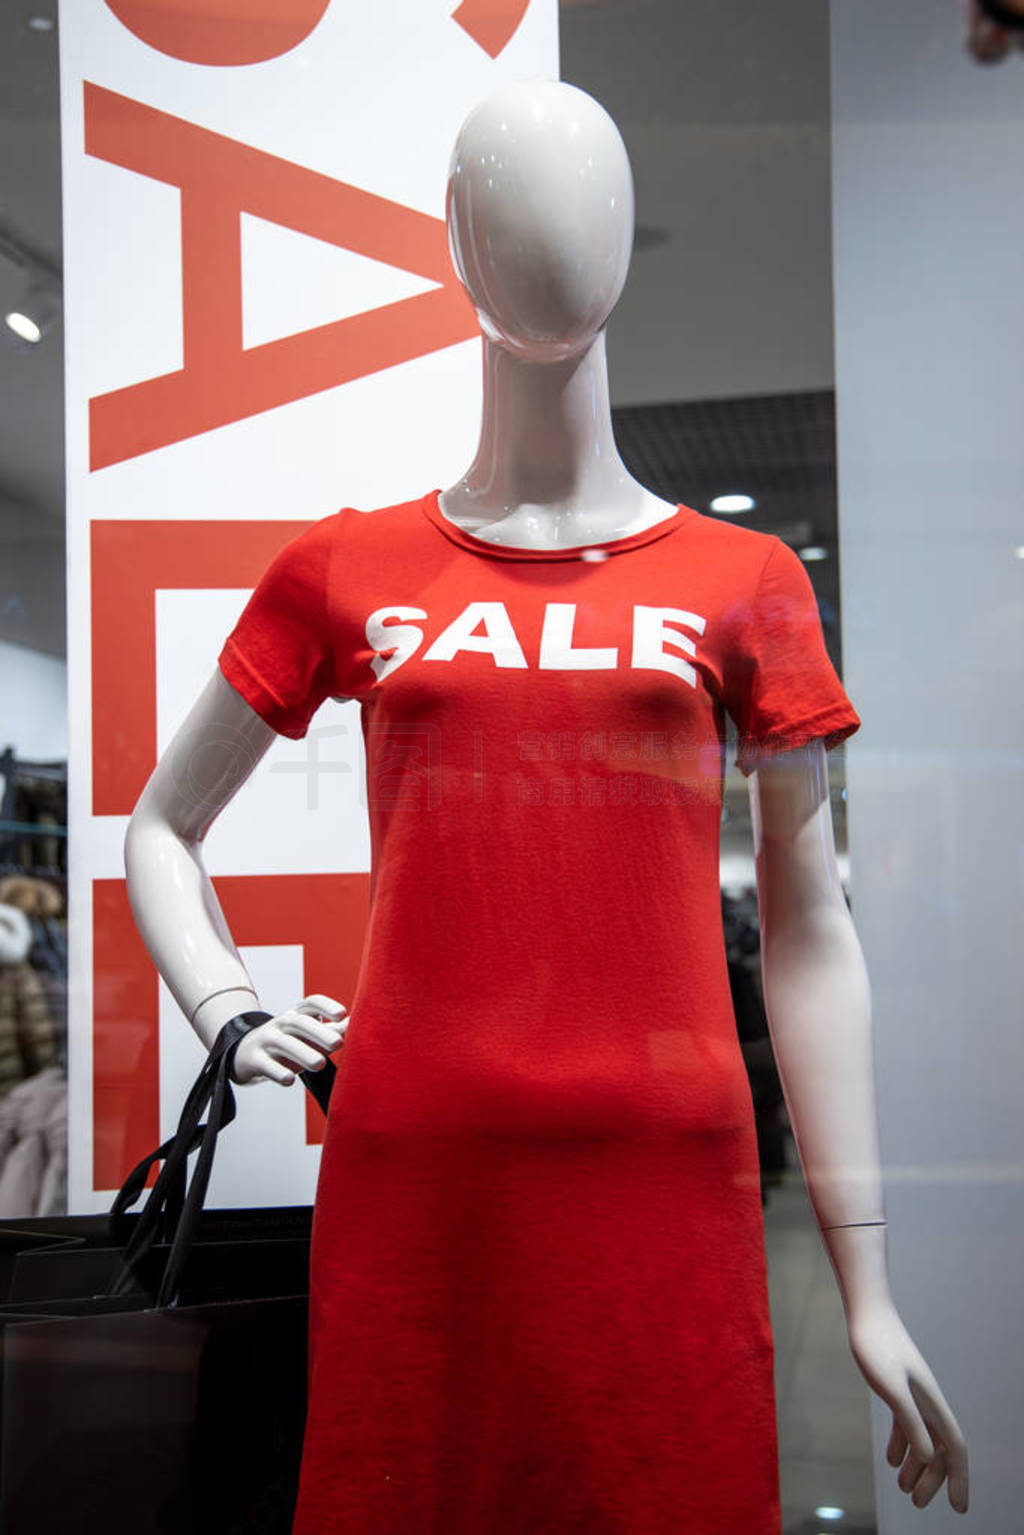 some mannequins wear a red shirt with the word